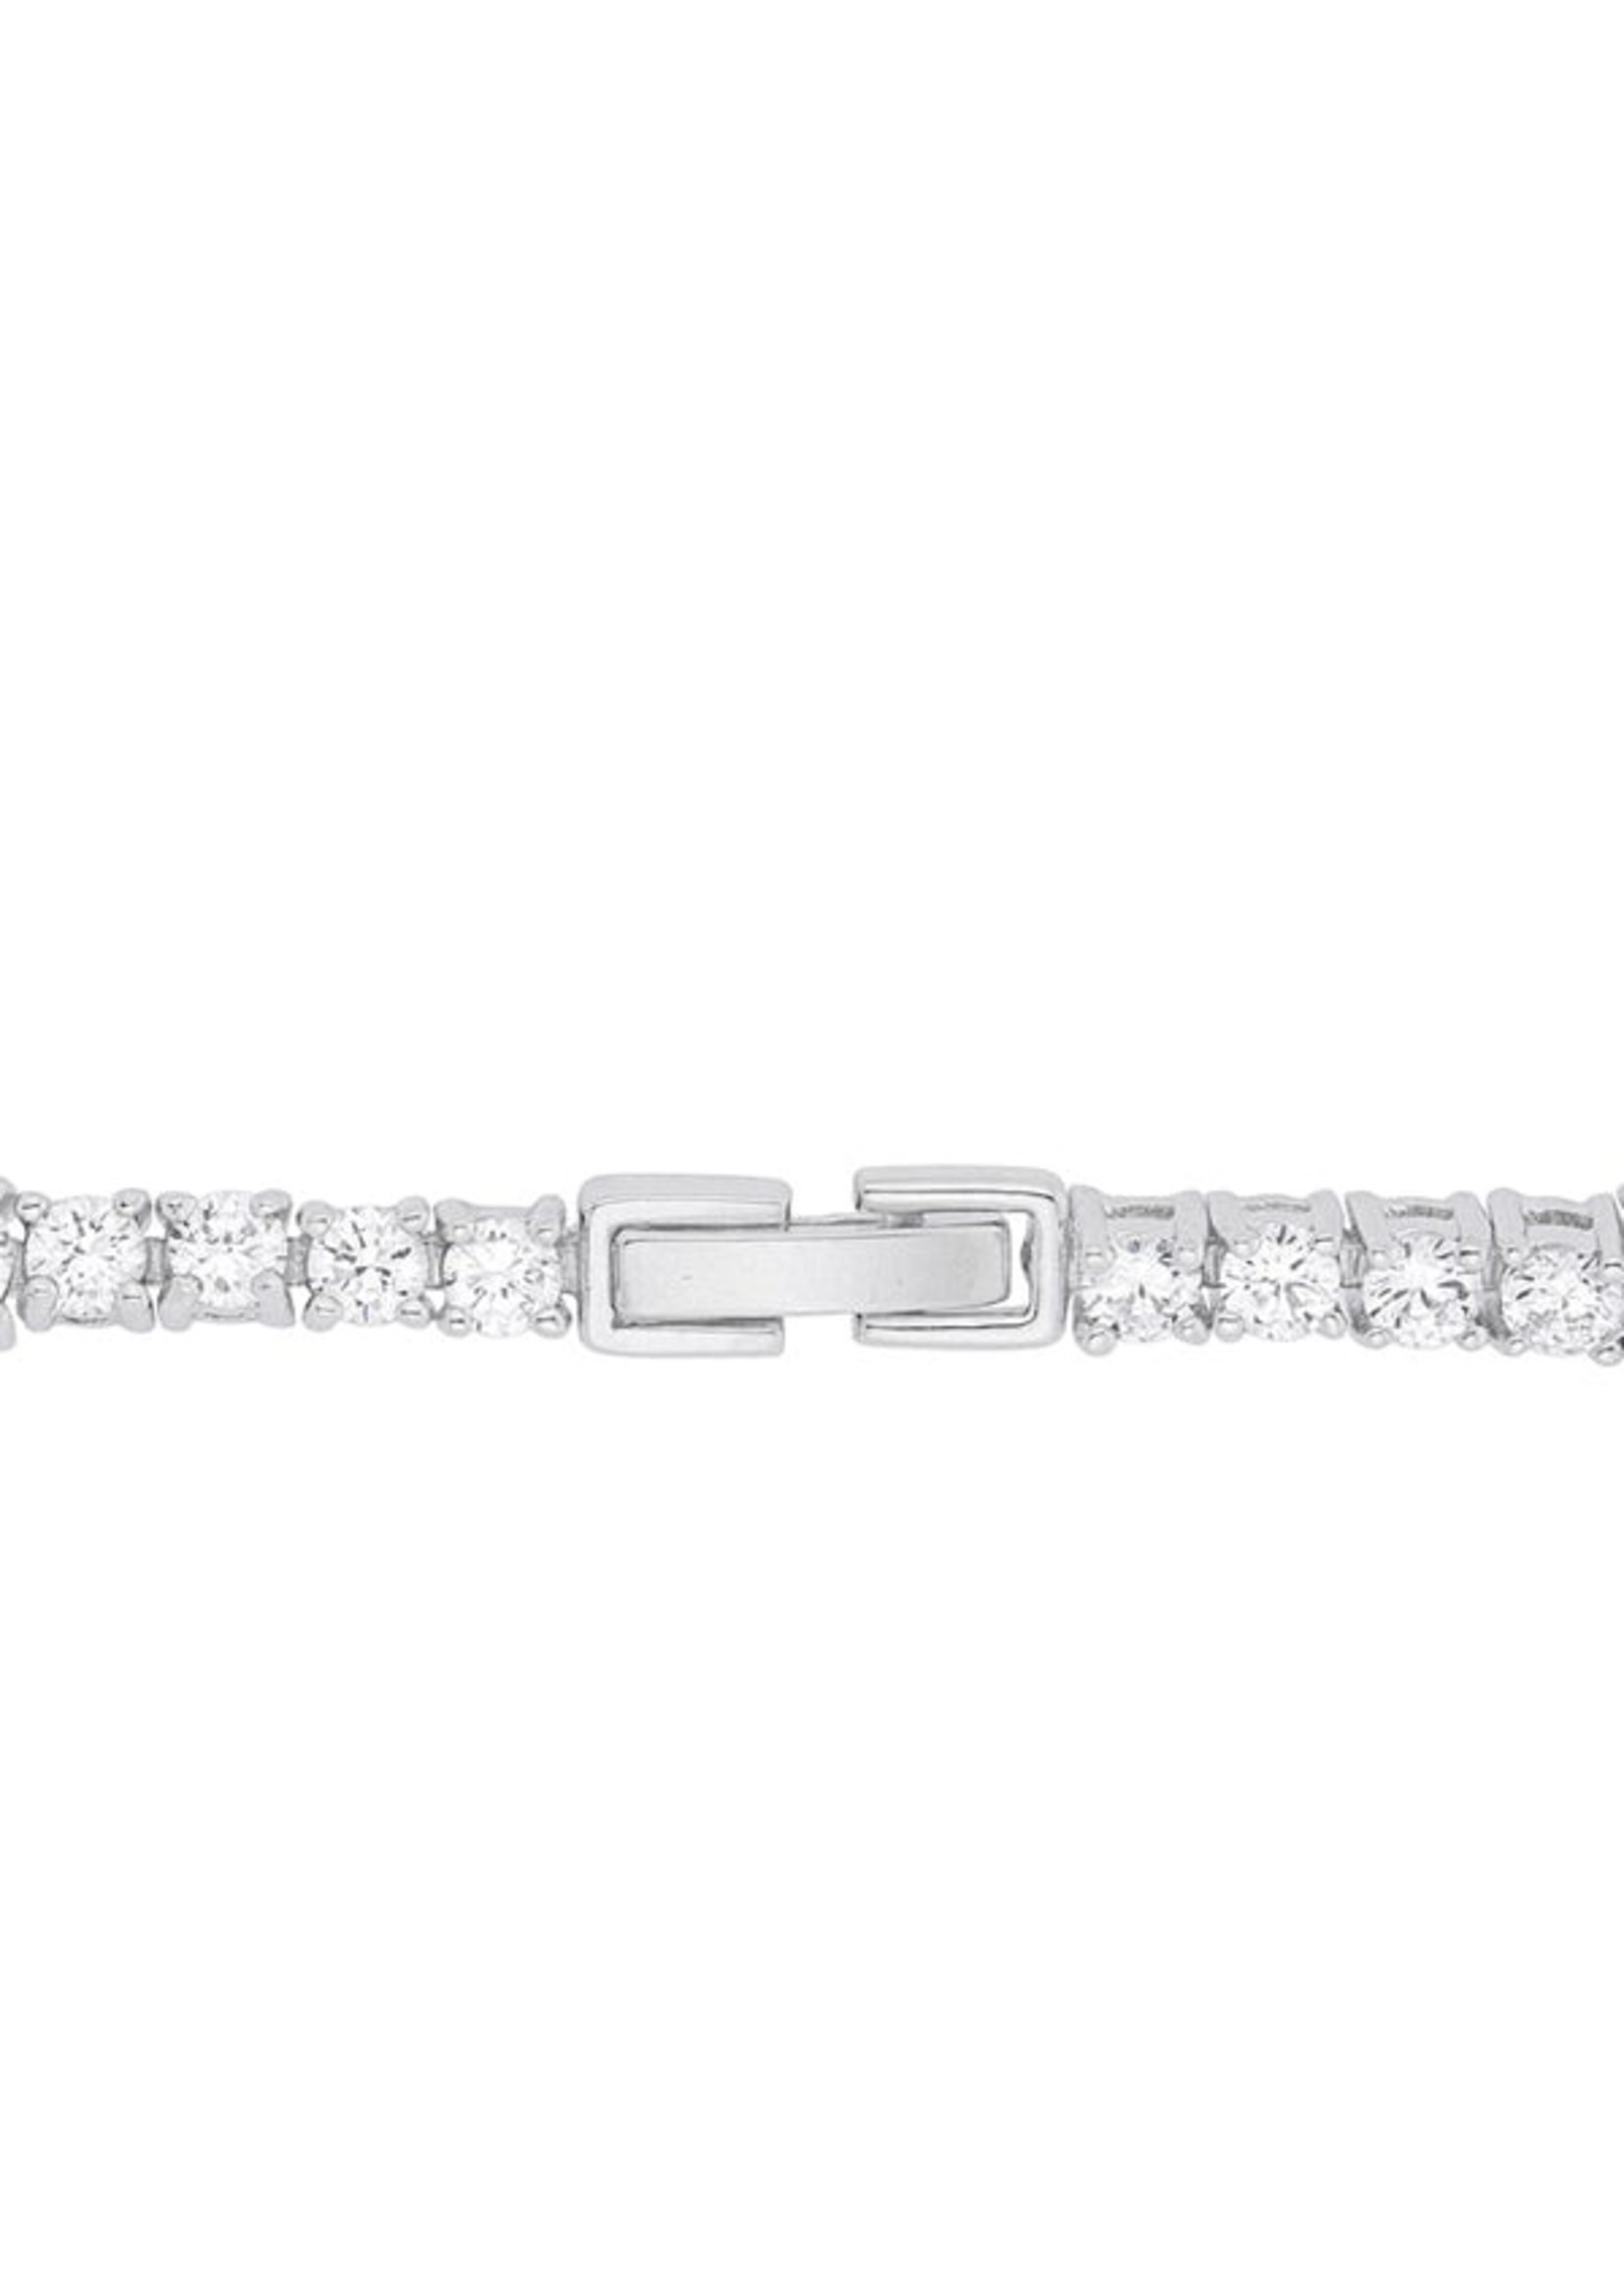 KDesign Regal Collection Elegant Pear and Round Cubic Zirconia Tennis Bracelet